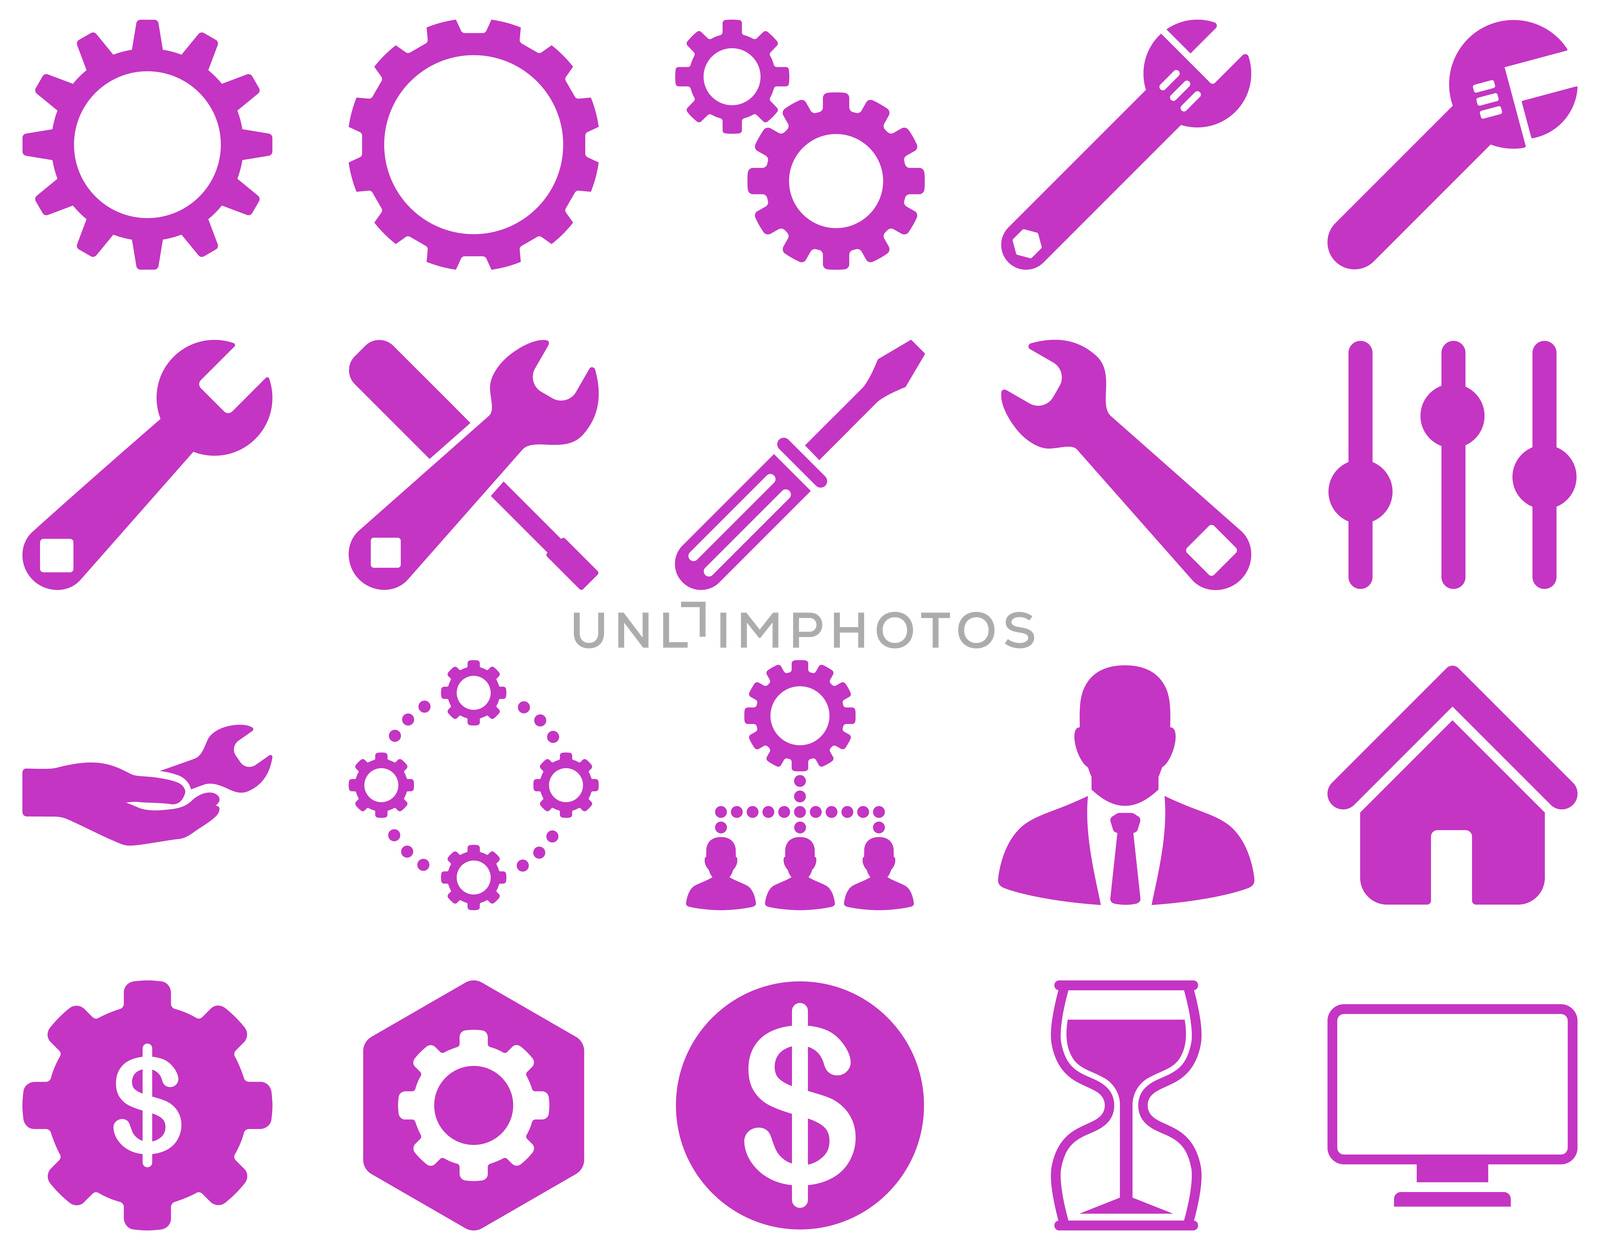 Settings and Tools Icons by ahasoft